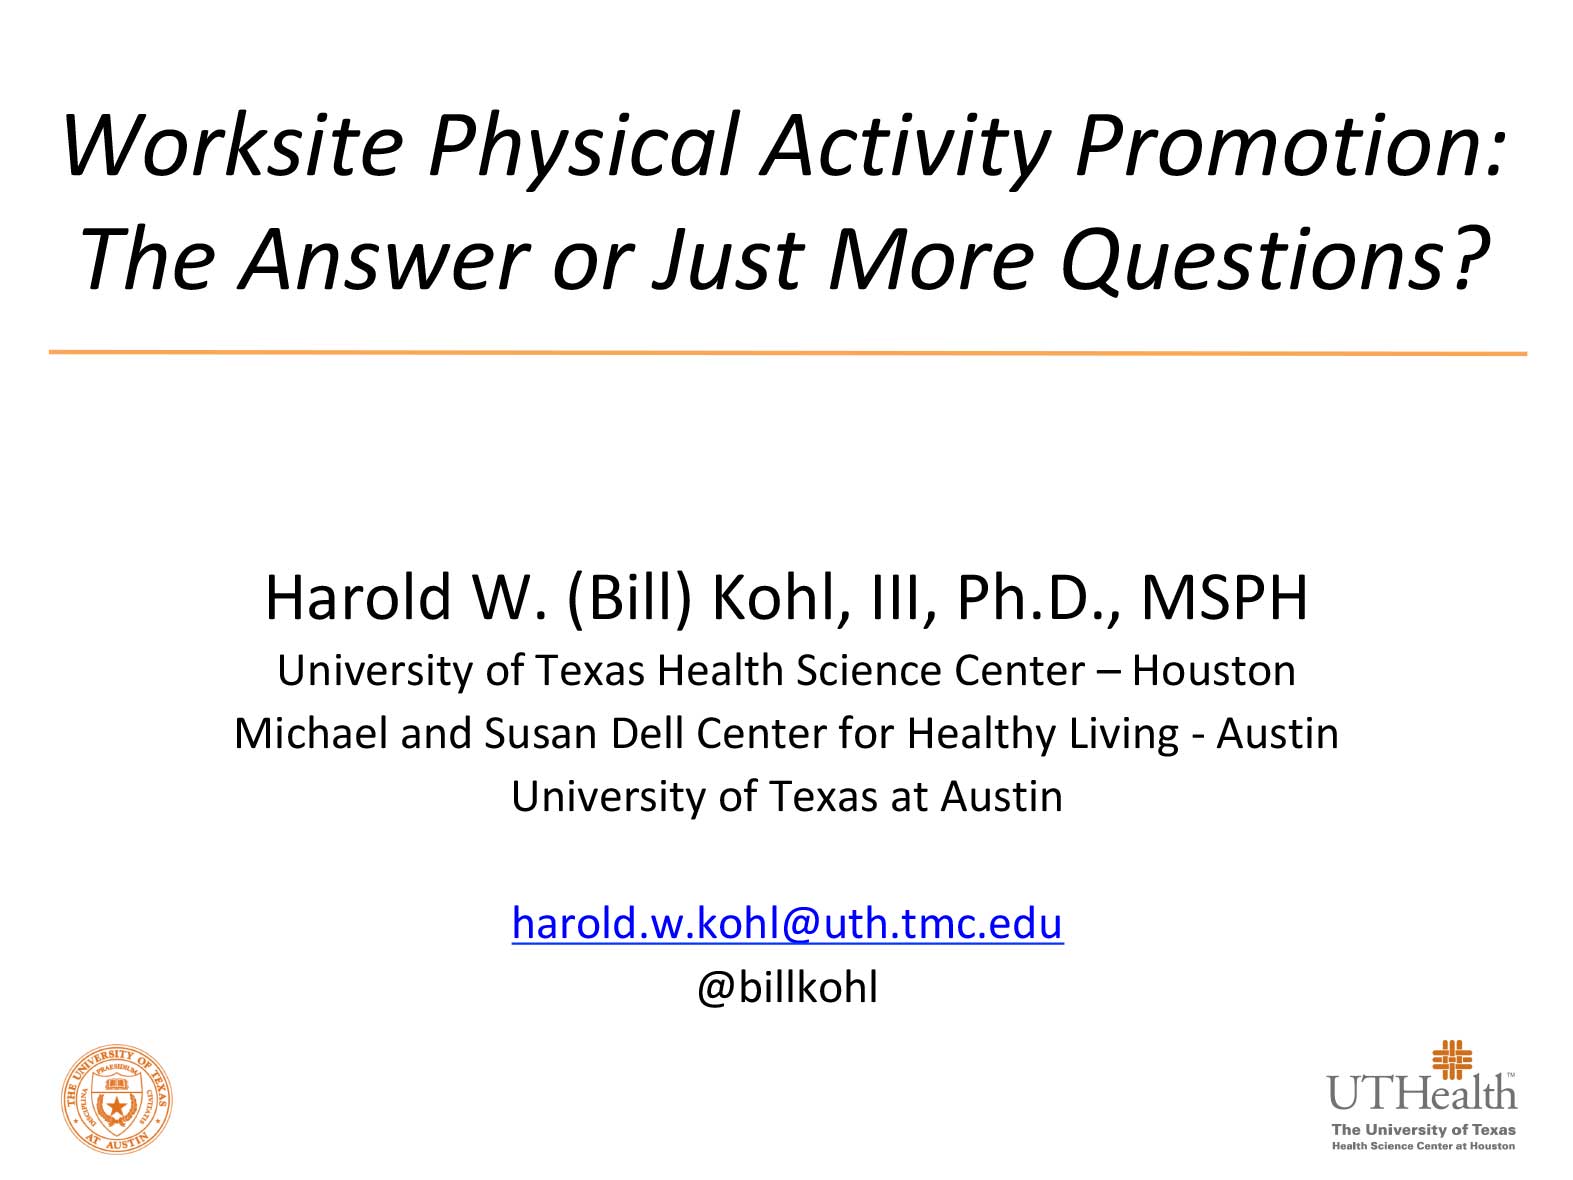 Worksite Physical Activity Promotion: The Answer or Just More Questions?